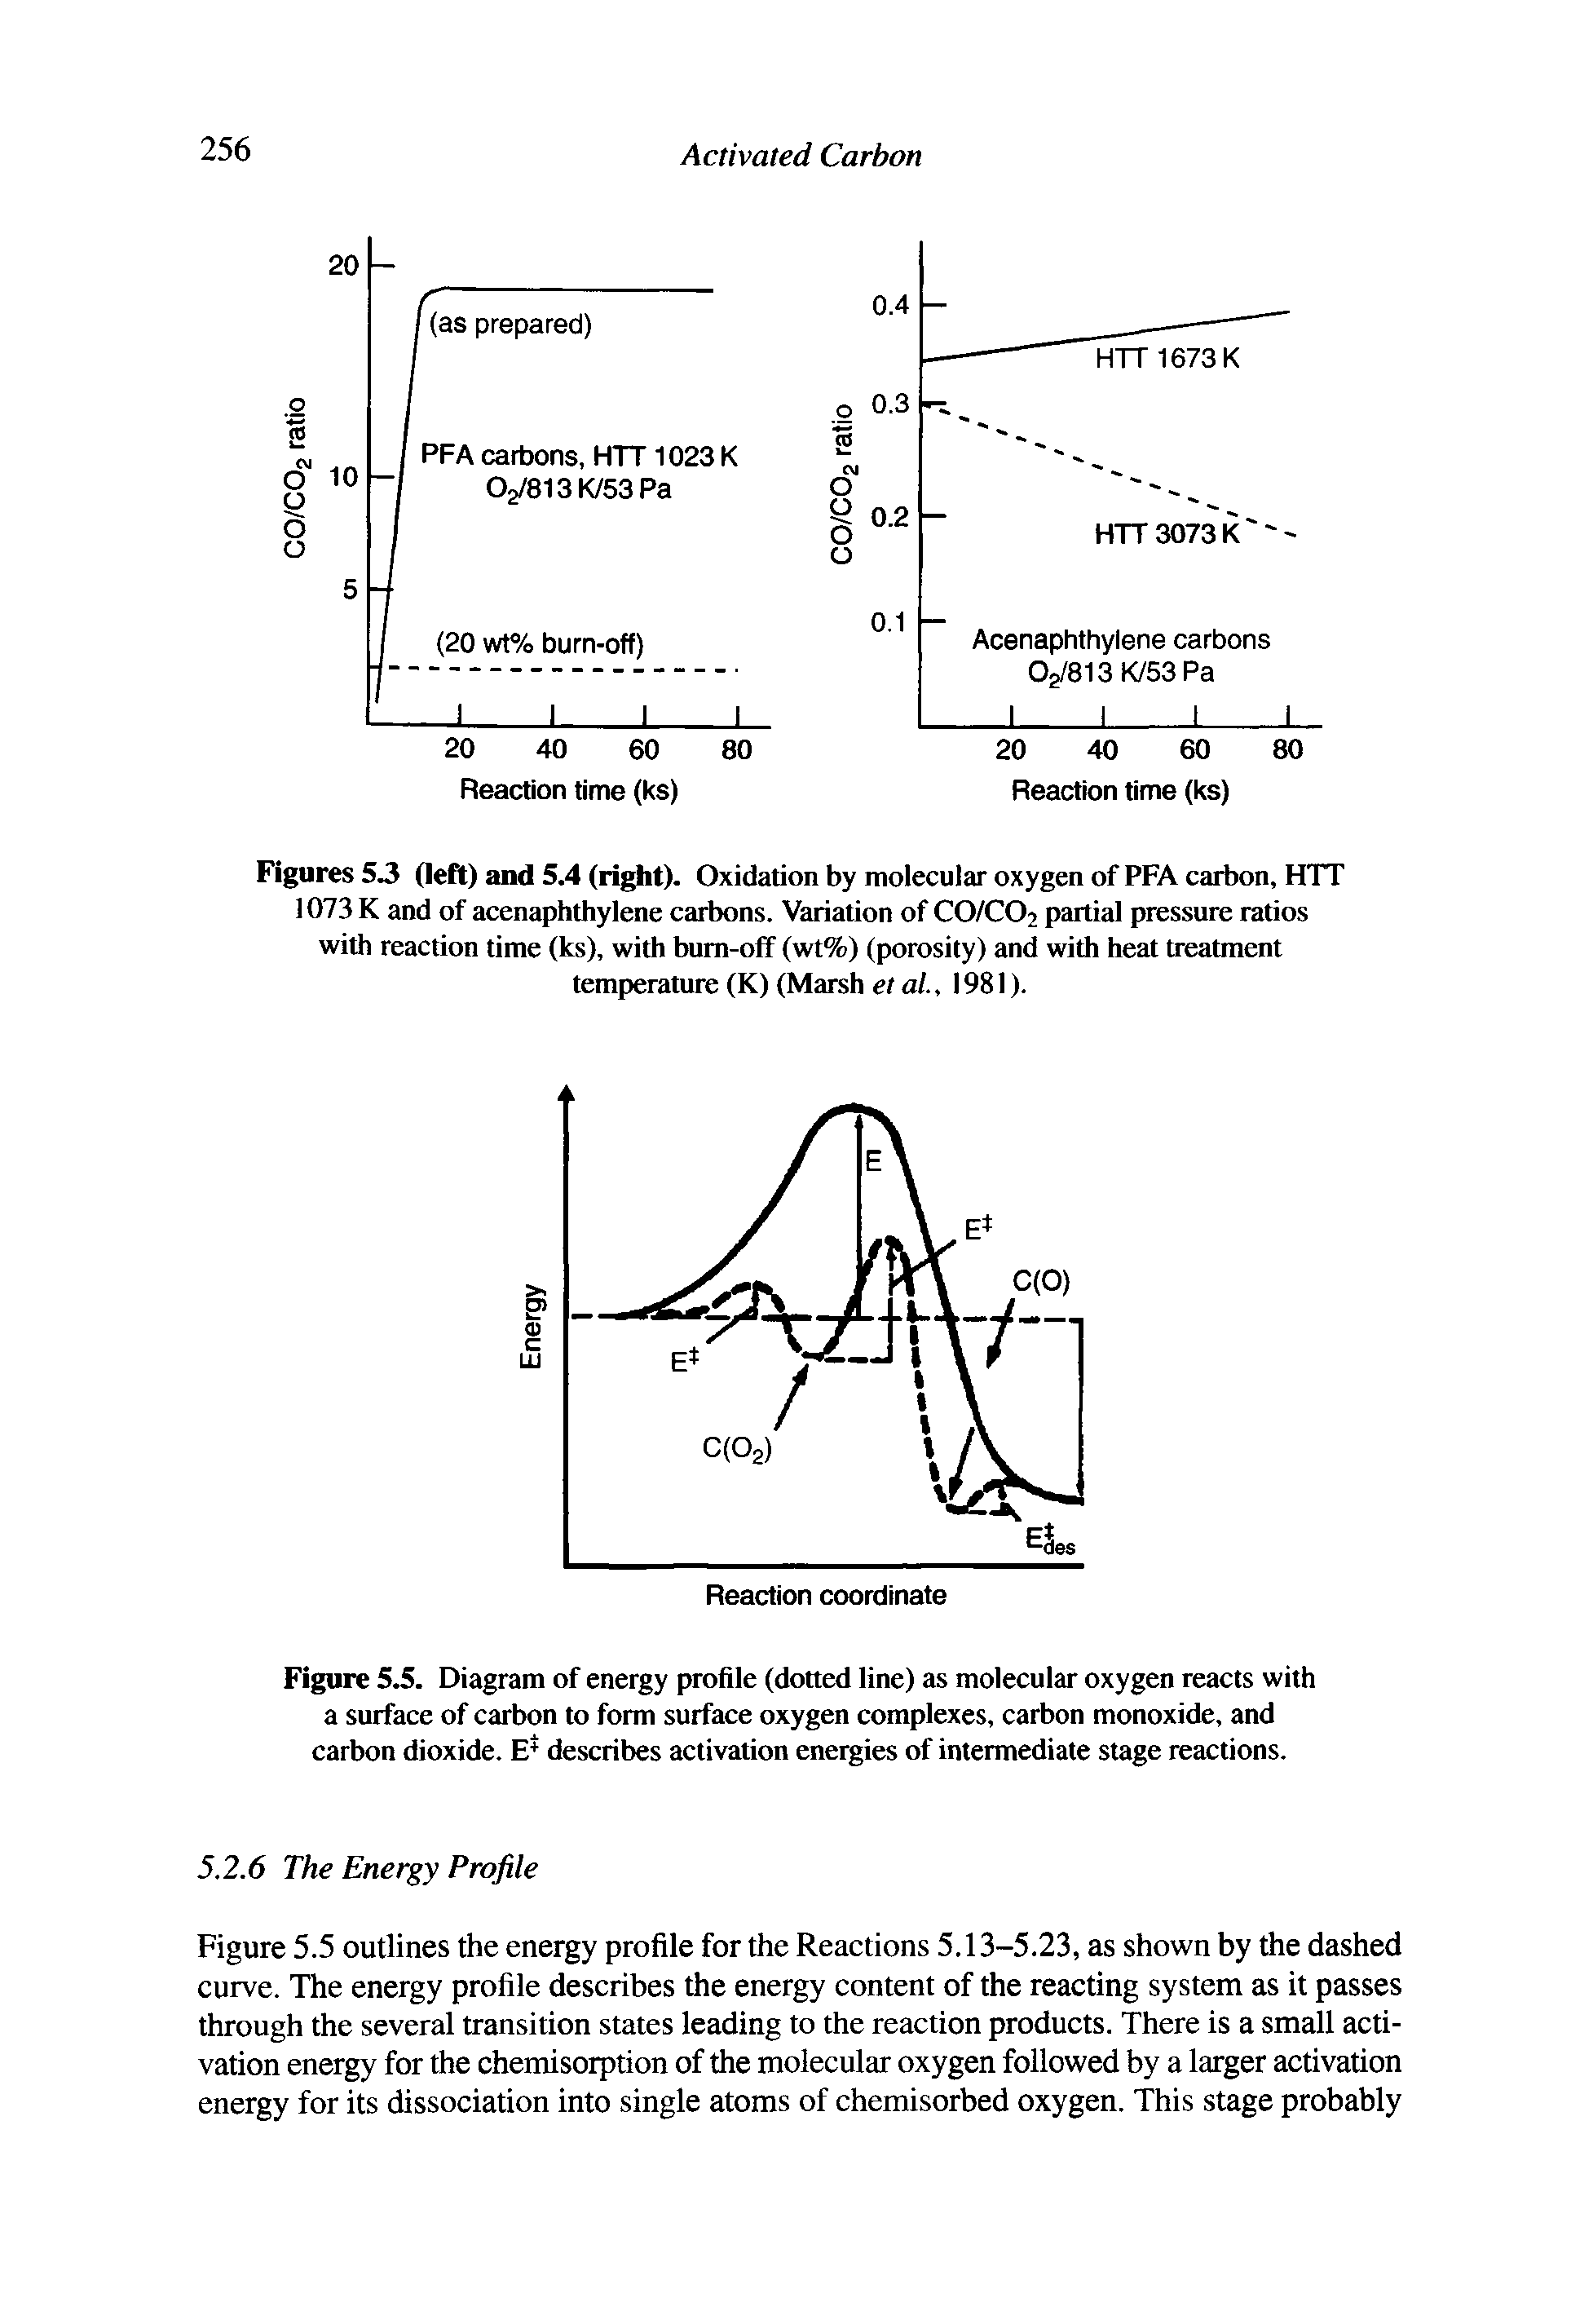 Figure 5.5. Diagram of energy profile (dotted line) as molecular oxygen reacts with a surface of carbon to form surface oxygen complexes, carbon monoxide, and carbon dioxide. describes activation energies of intermediate stage reactions.